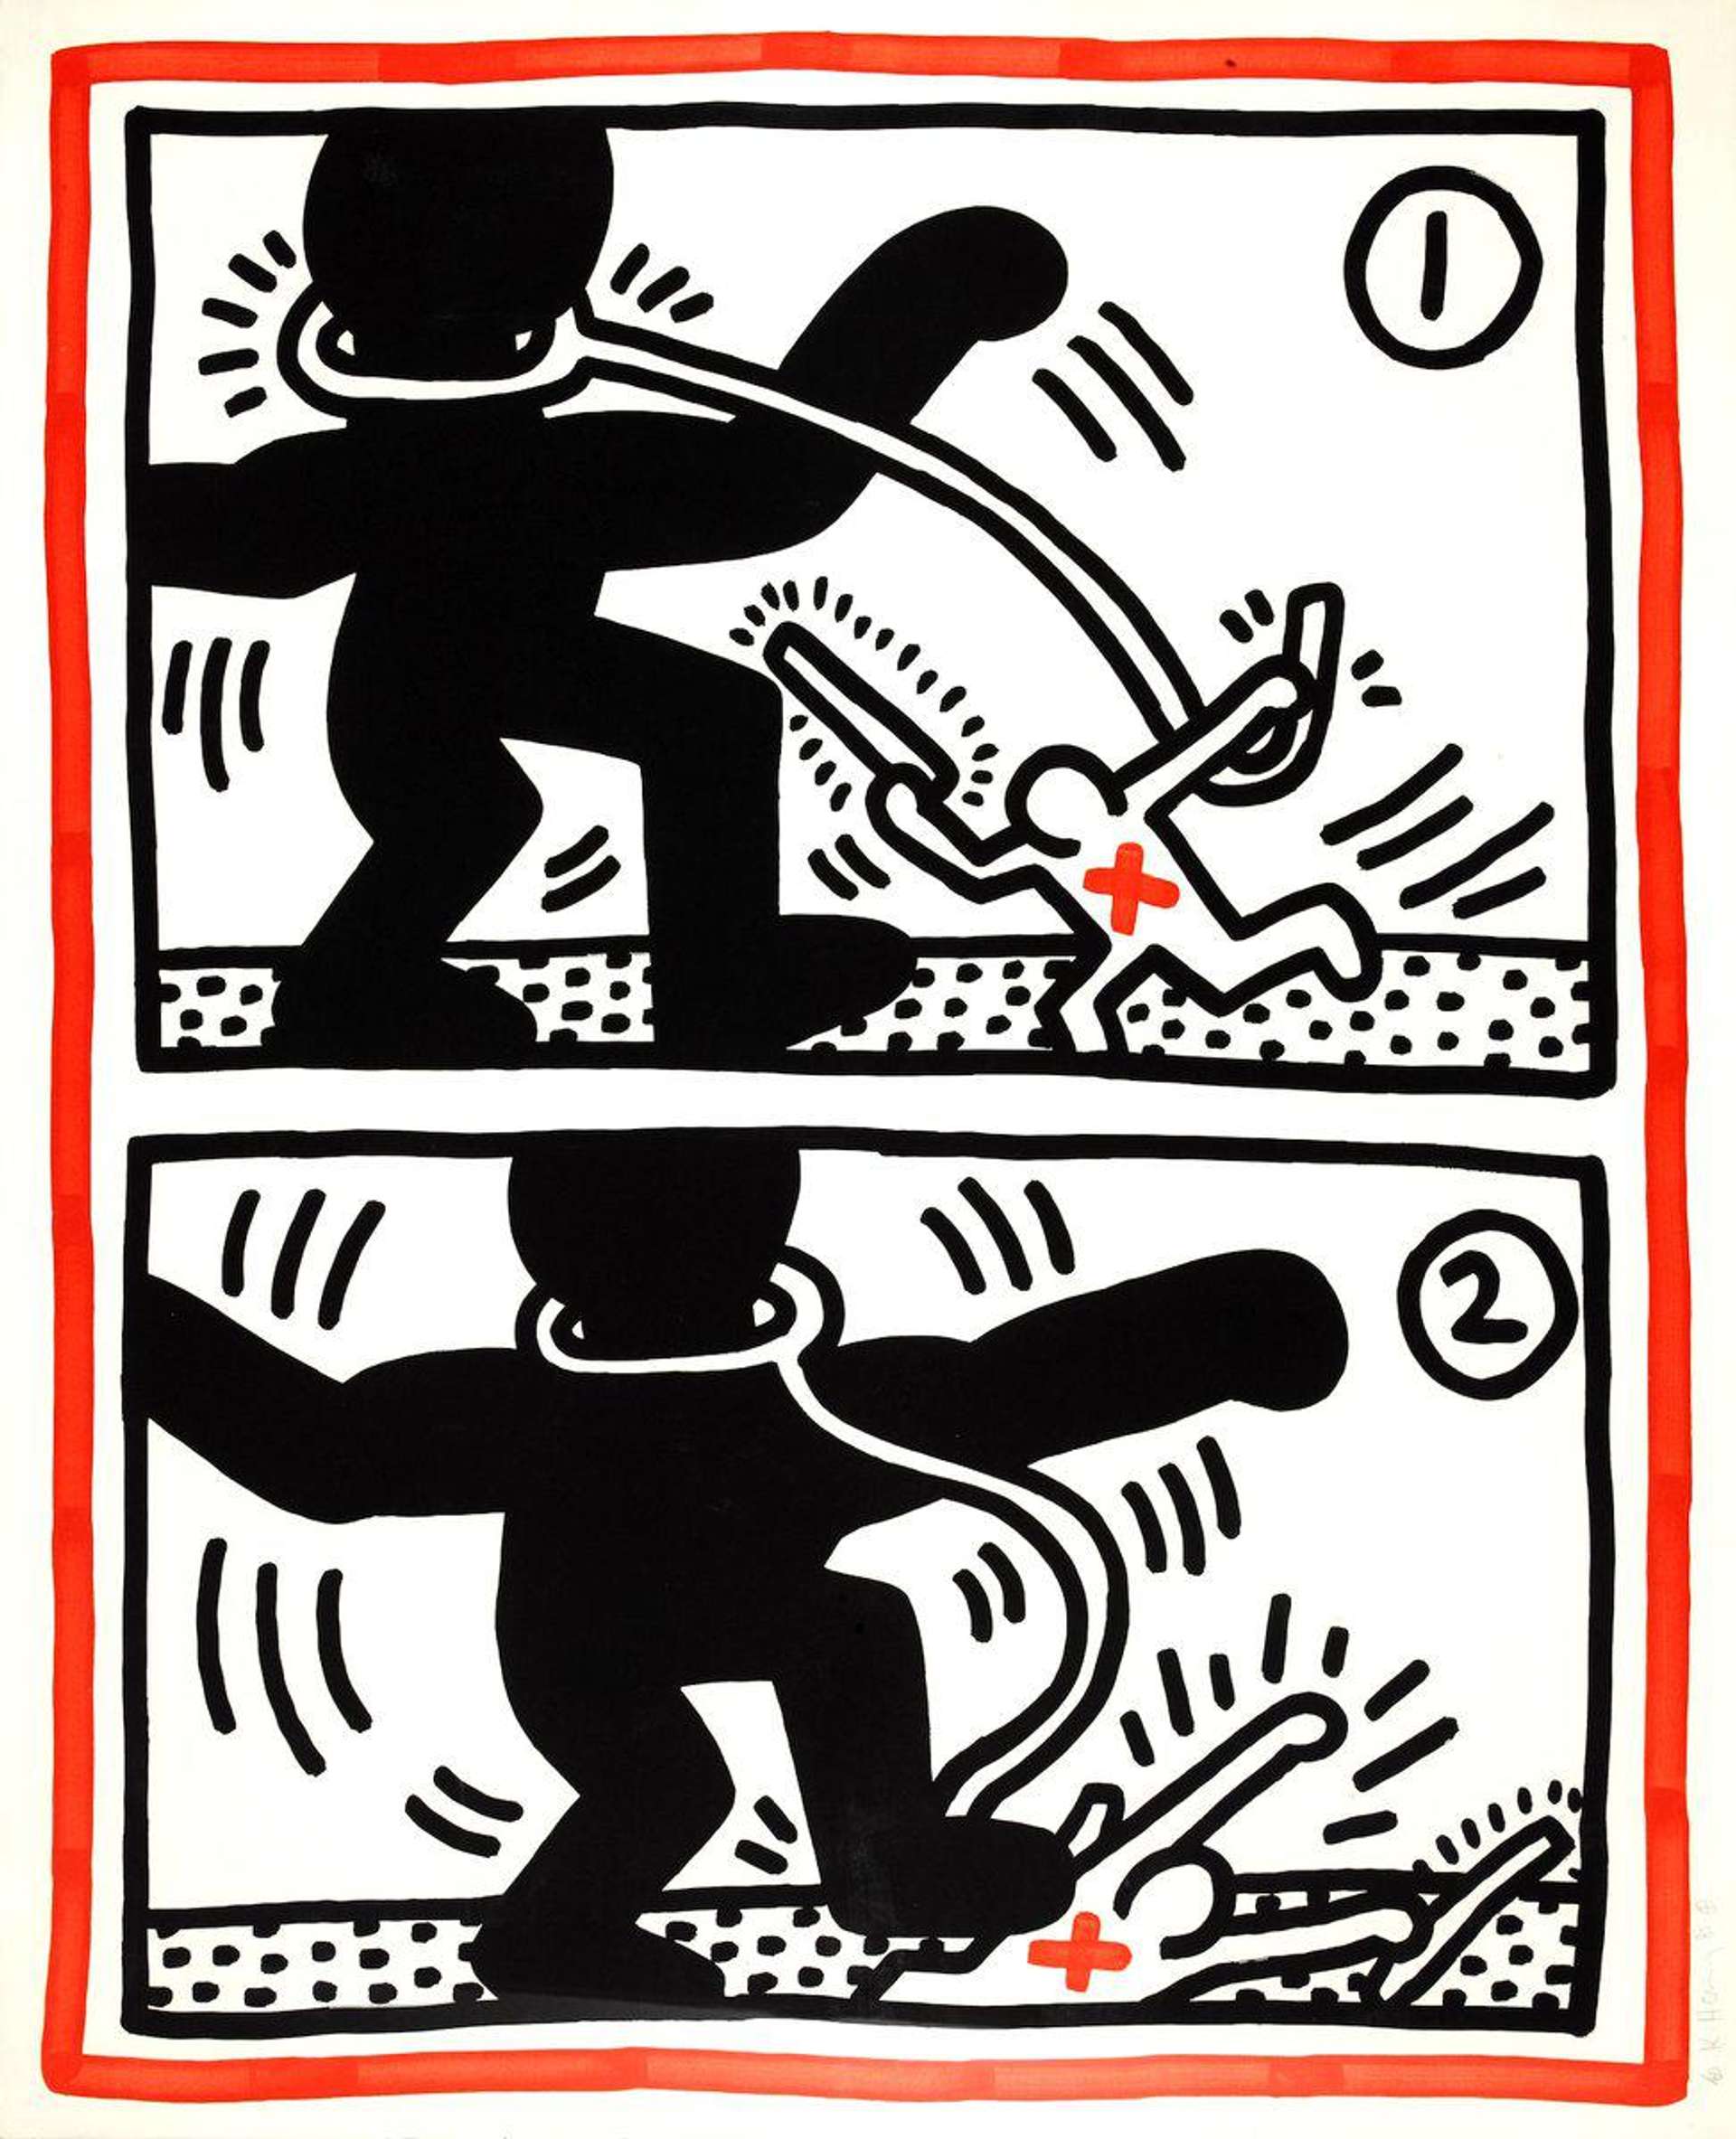 Plate 3 from the Free South Africa series features two numbered frames depicting two stick figures in a struggle with one another. Using his bold, linear style Haring represents the relationship between the black majority and white minority in South Africa during years of institutionalised racial segregation. The black figure on the left is rendered much larger than the white figure, symbolising the substantial disparity between the black majority and the few white people that had political and social power at the time. Haring clearly conveys this inequality of the white man’s power by showing the white figure with a rope around the black figure’s neck.